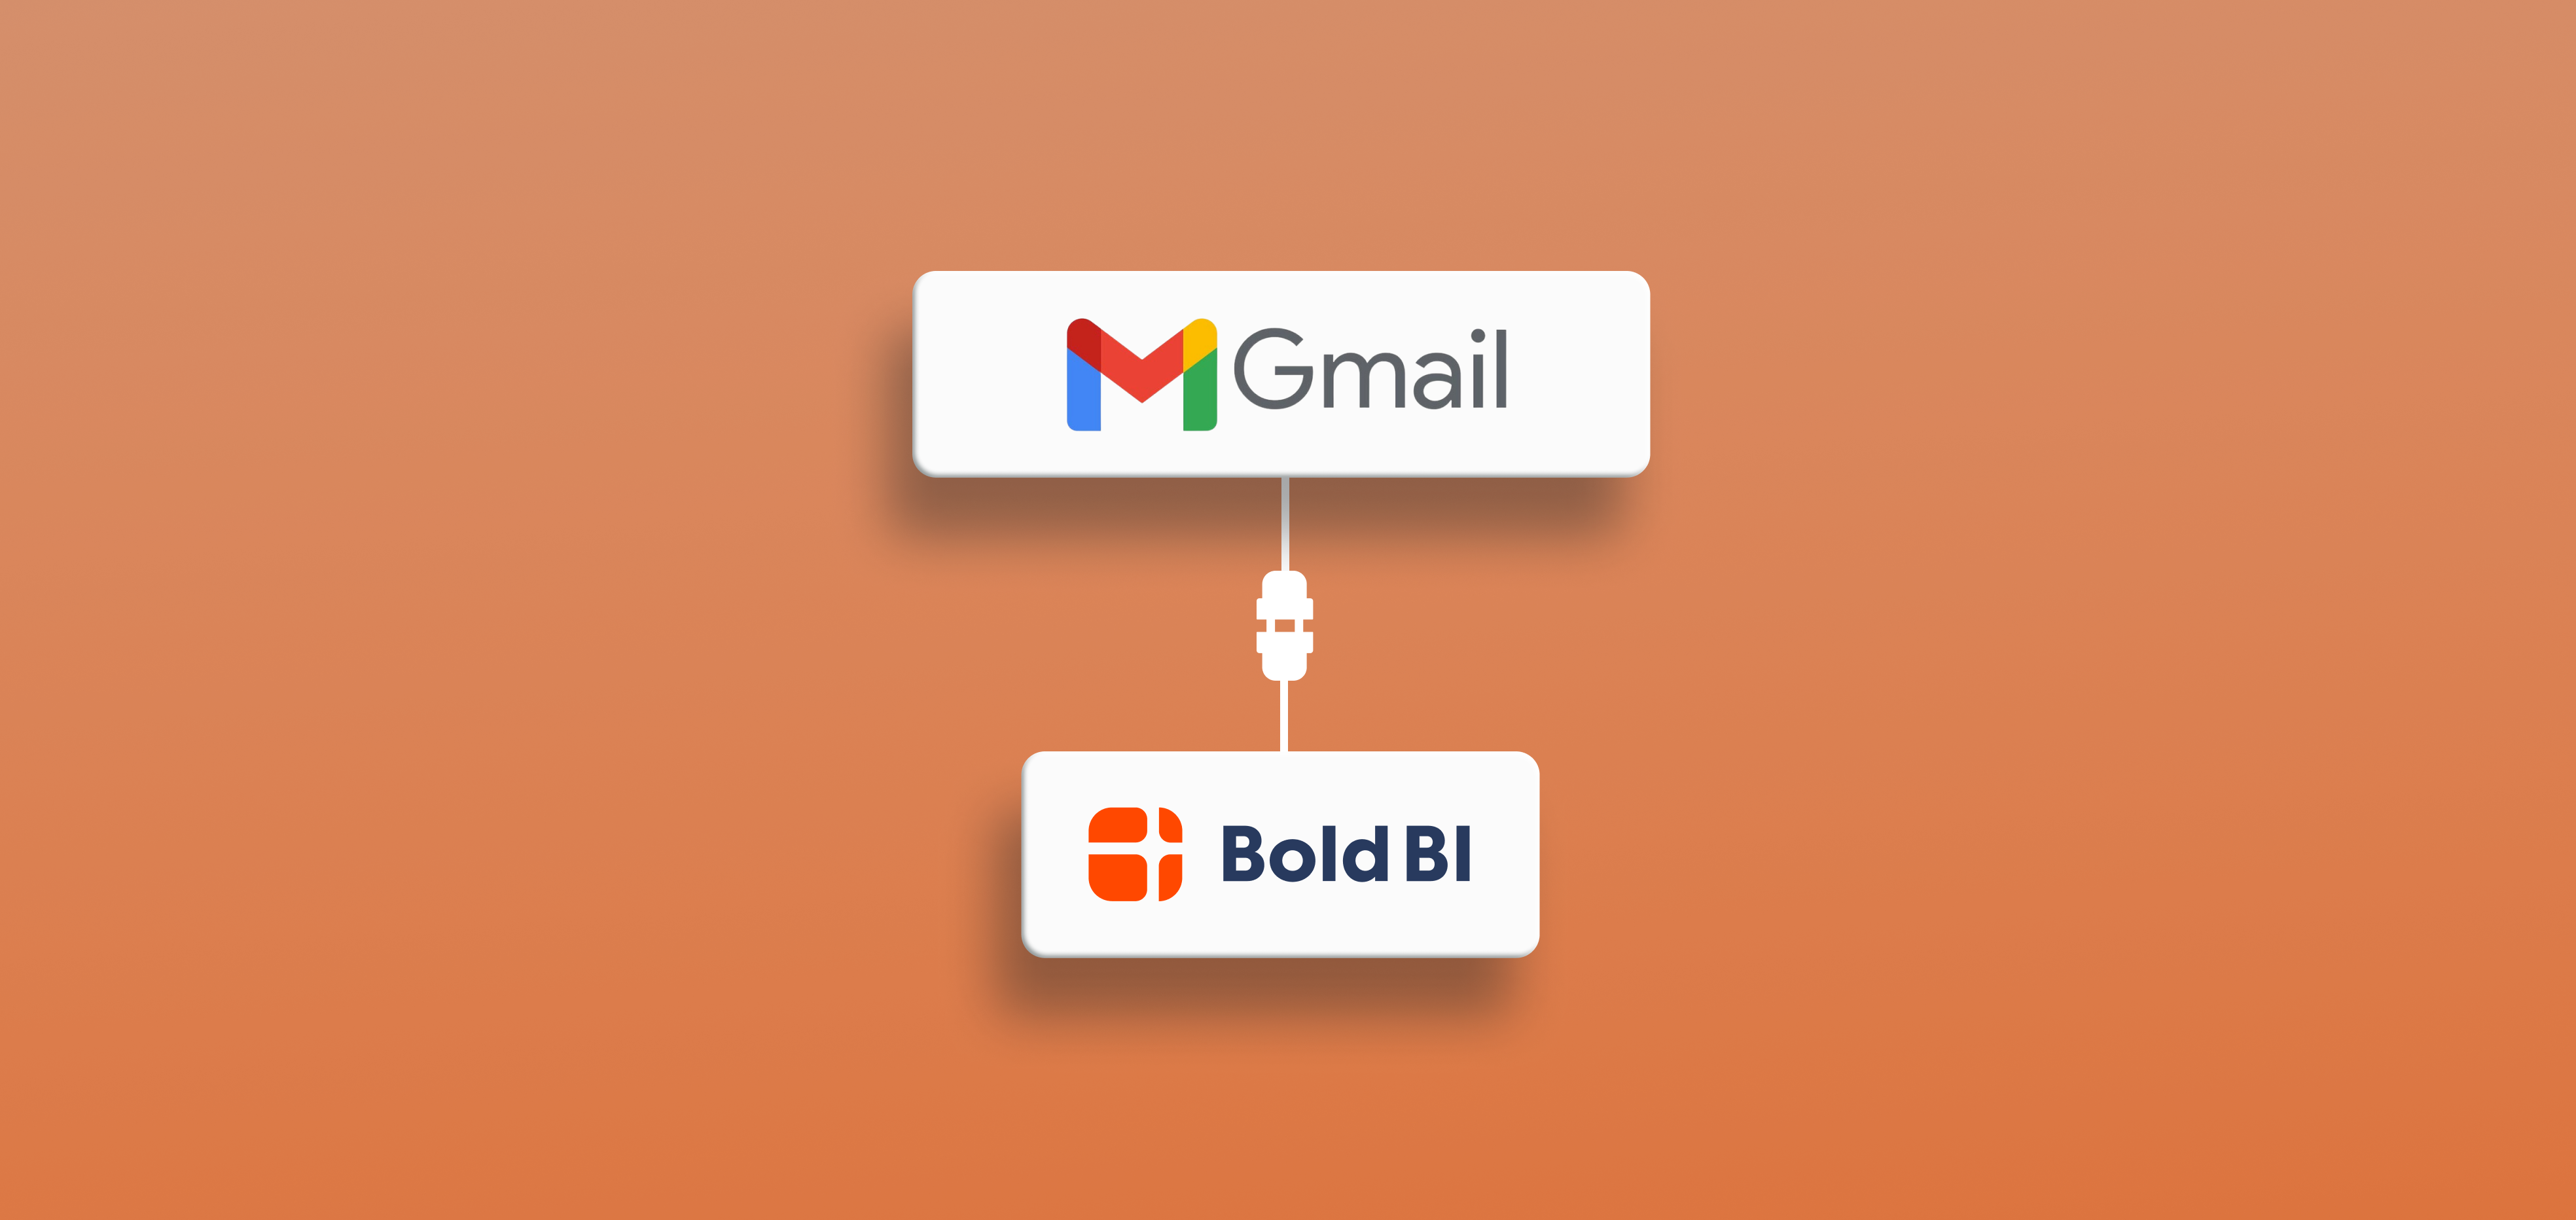 You can connect to web services of popular site like Gmail connection type.